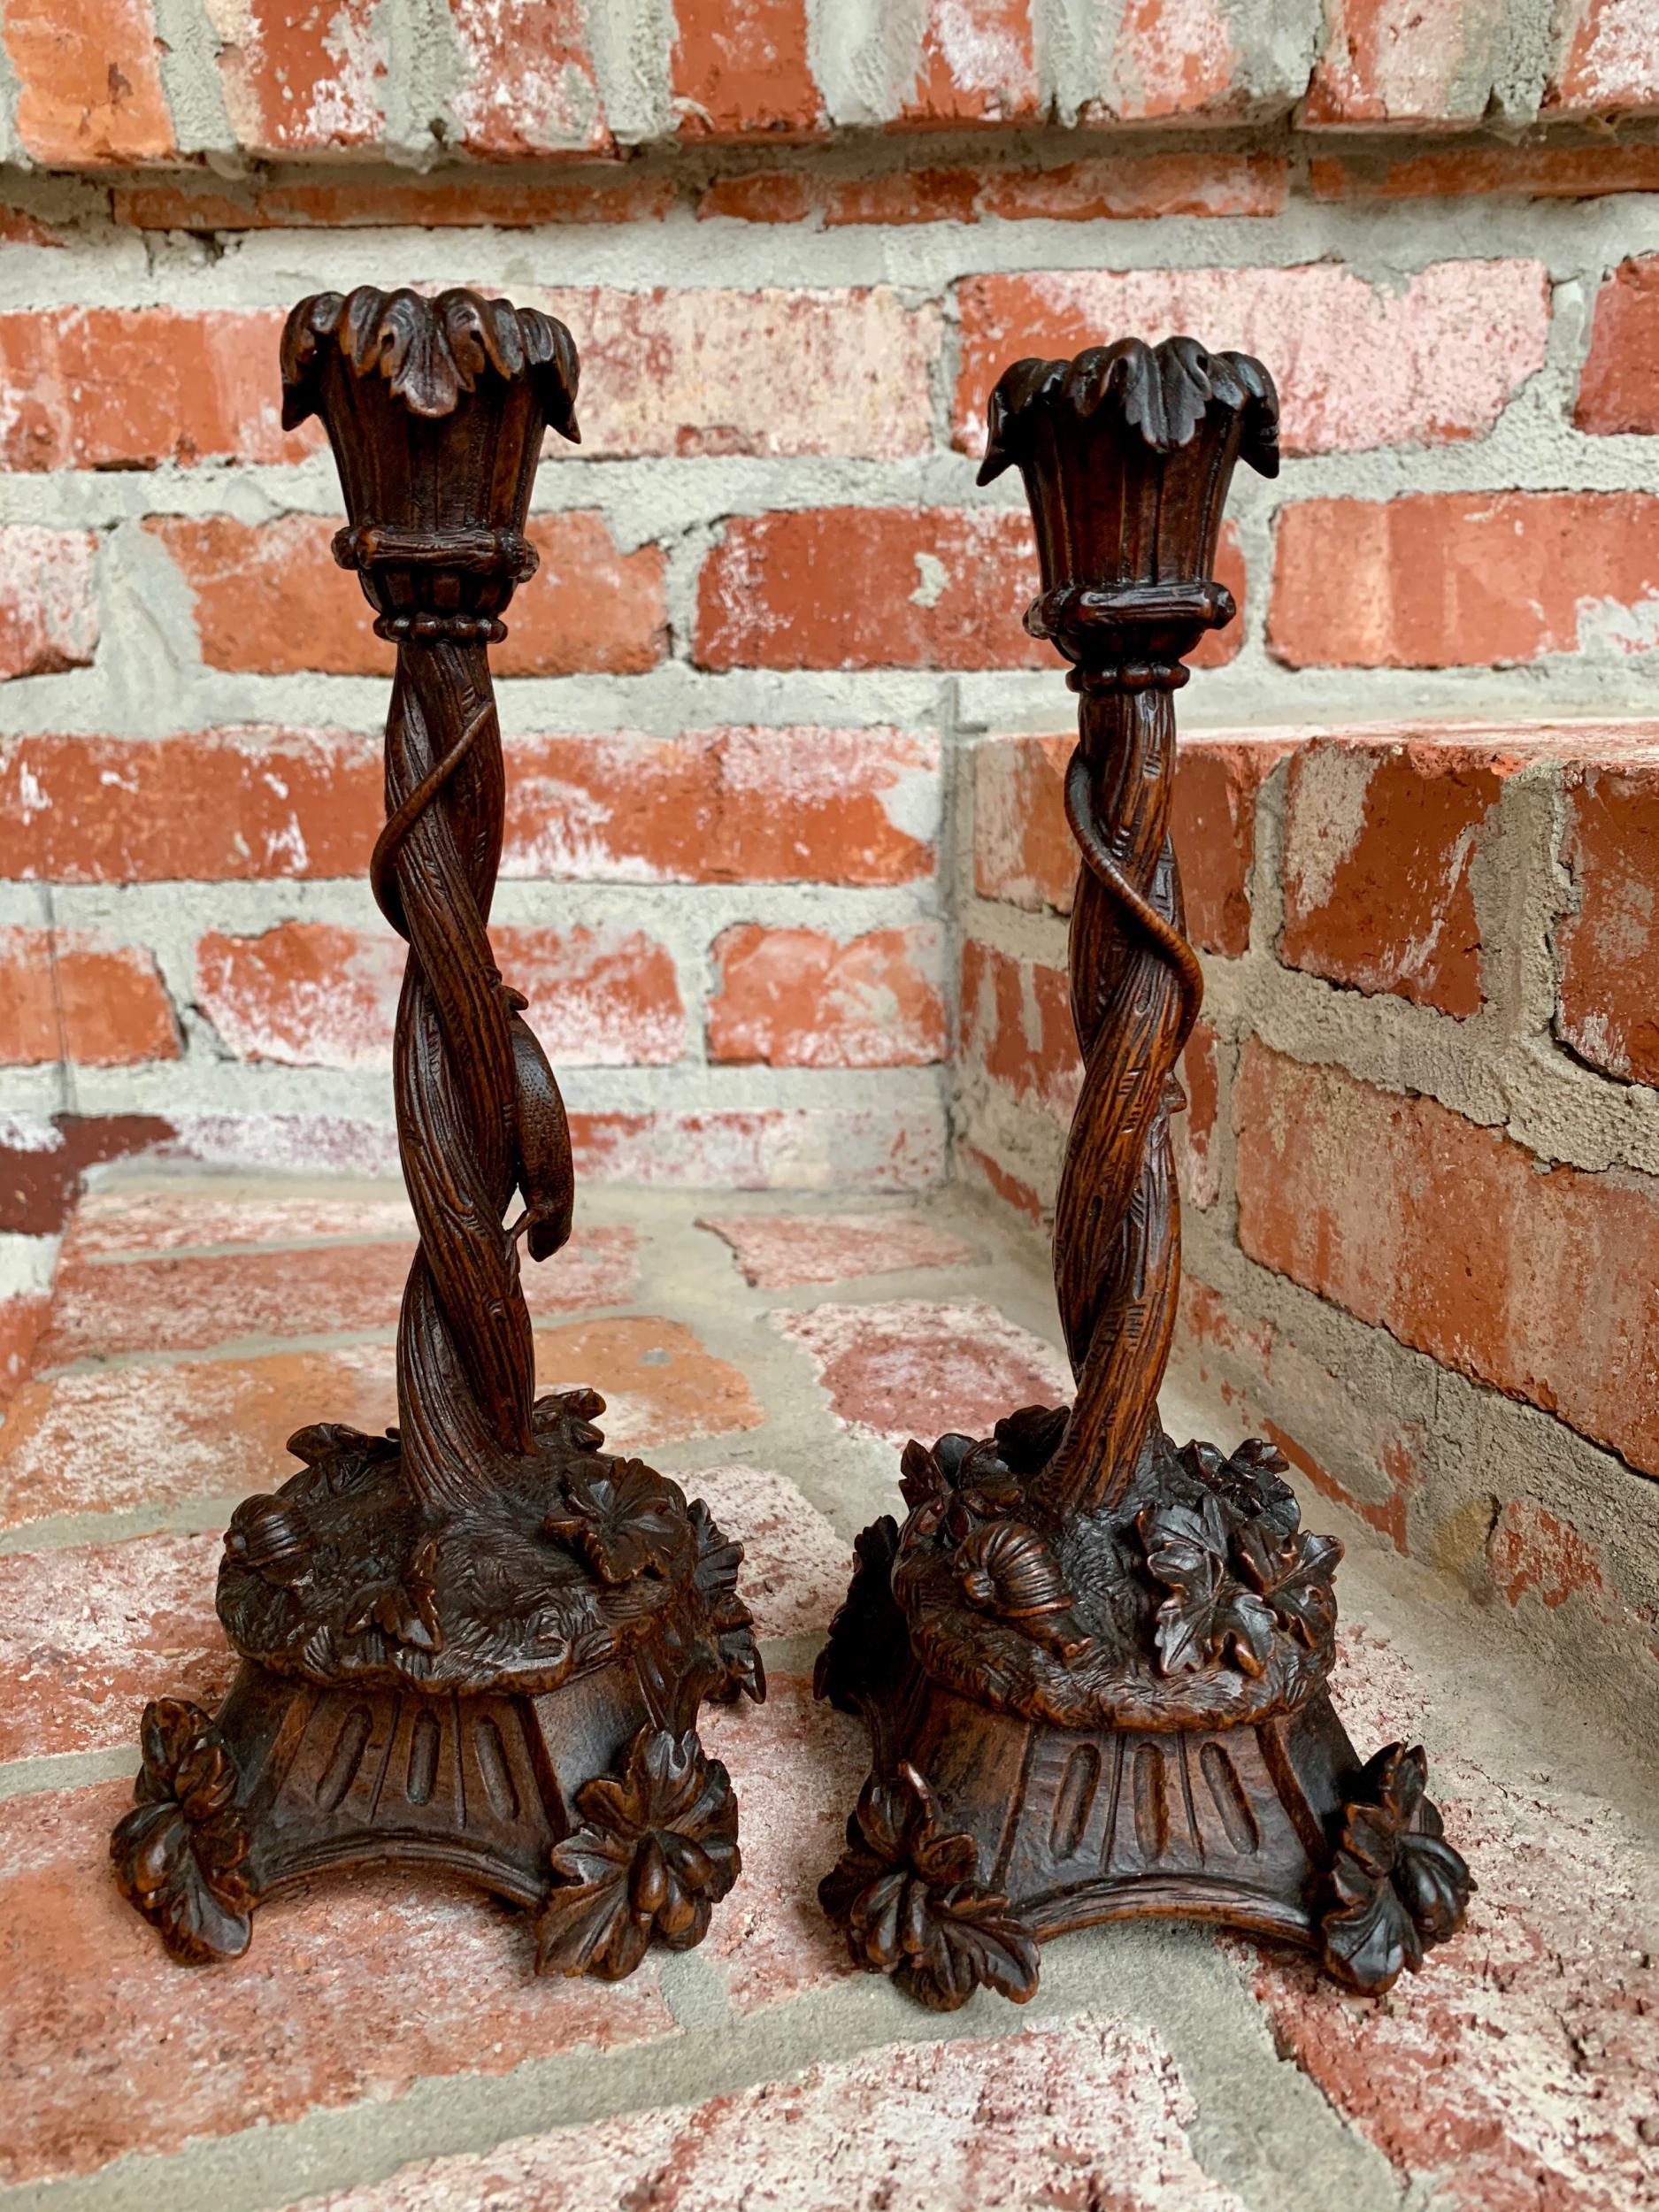 Pair of antique Black Forest carved wood candlesticks candleholder lizard insects

~ Direct from Europe
~ Note: This is one of several outstanding antique Black Forest pieces we acquired directly from a dealer in France that liquidated their